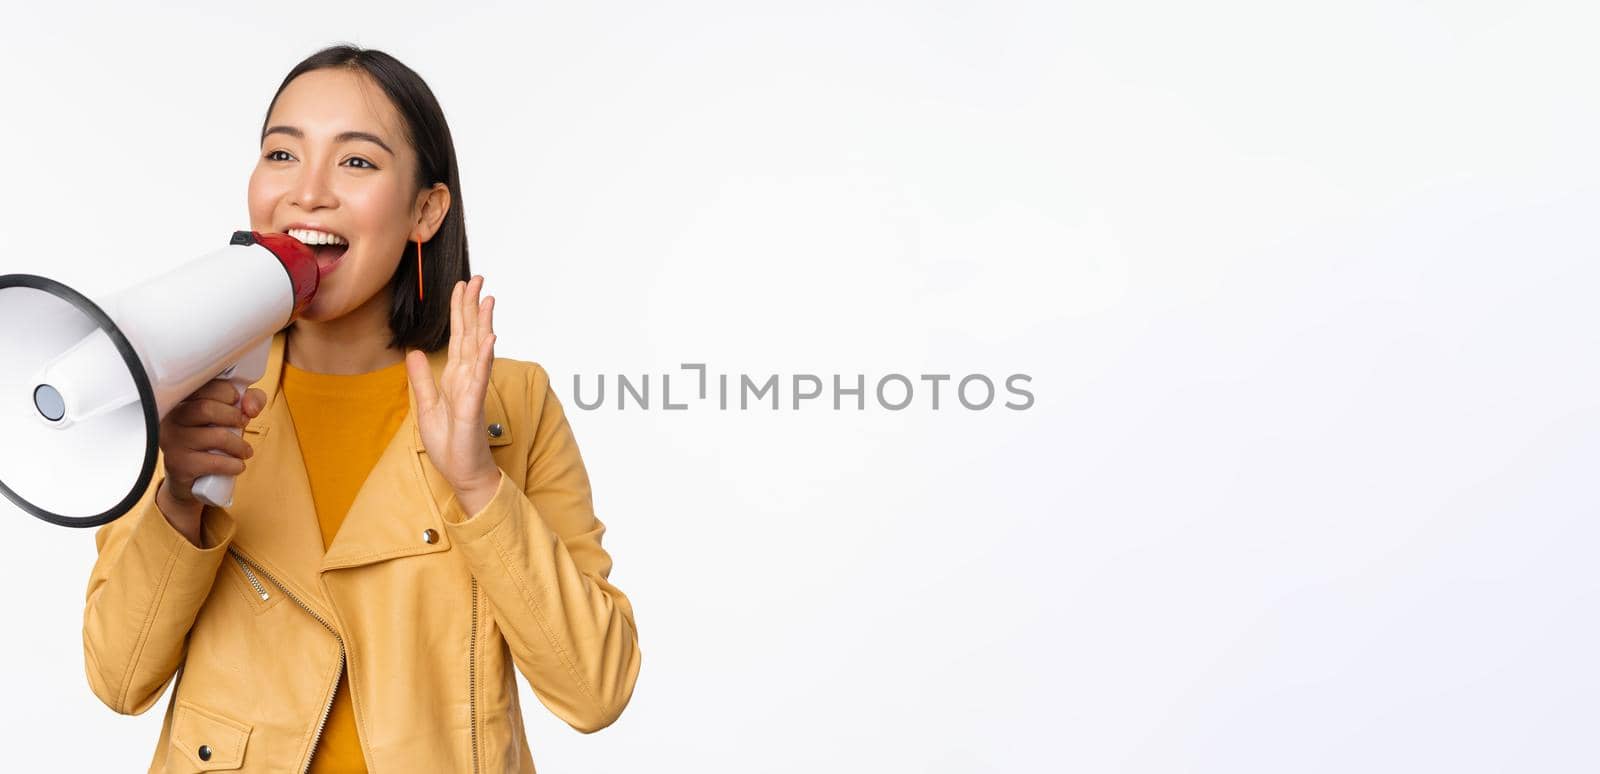 Attention announcement. Image of asian woman shouting in megaphone, recruiting, searching people, sharing information, standing over white background.